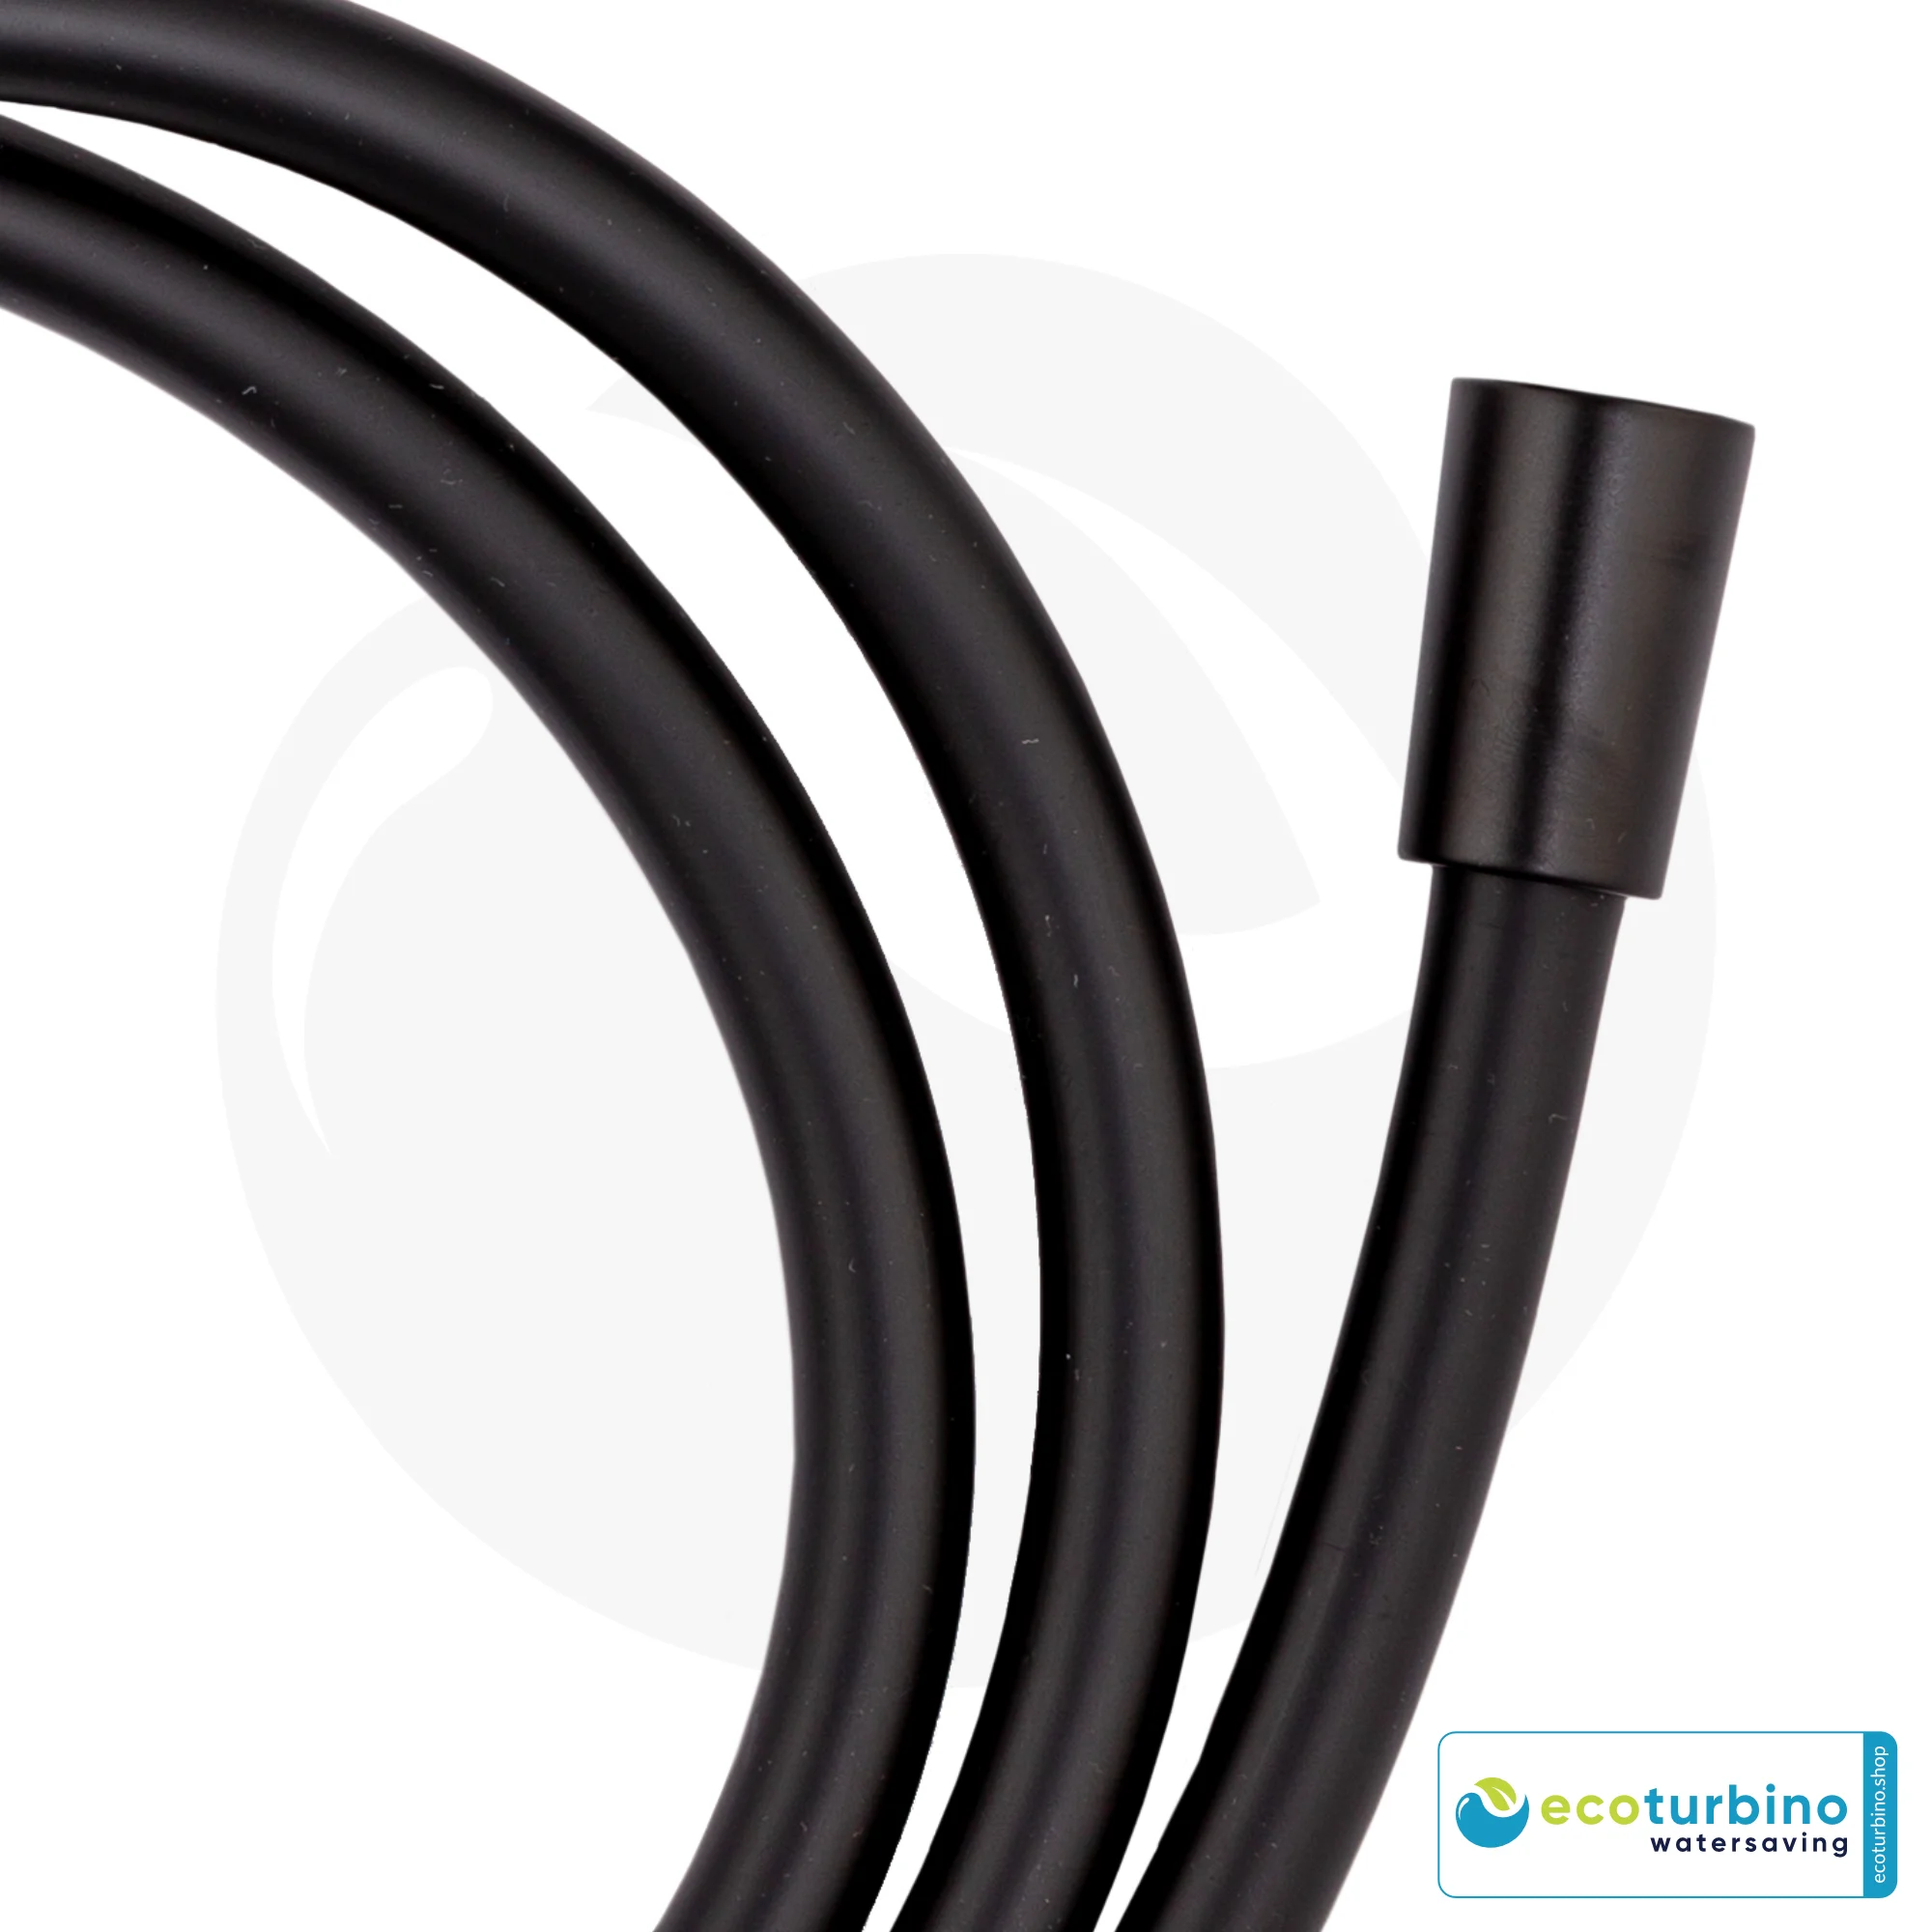 Shower Hose | Hand Shower Hose | Replacement Hose for the Shower Cabin by ecoturbino® | black